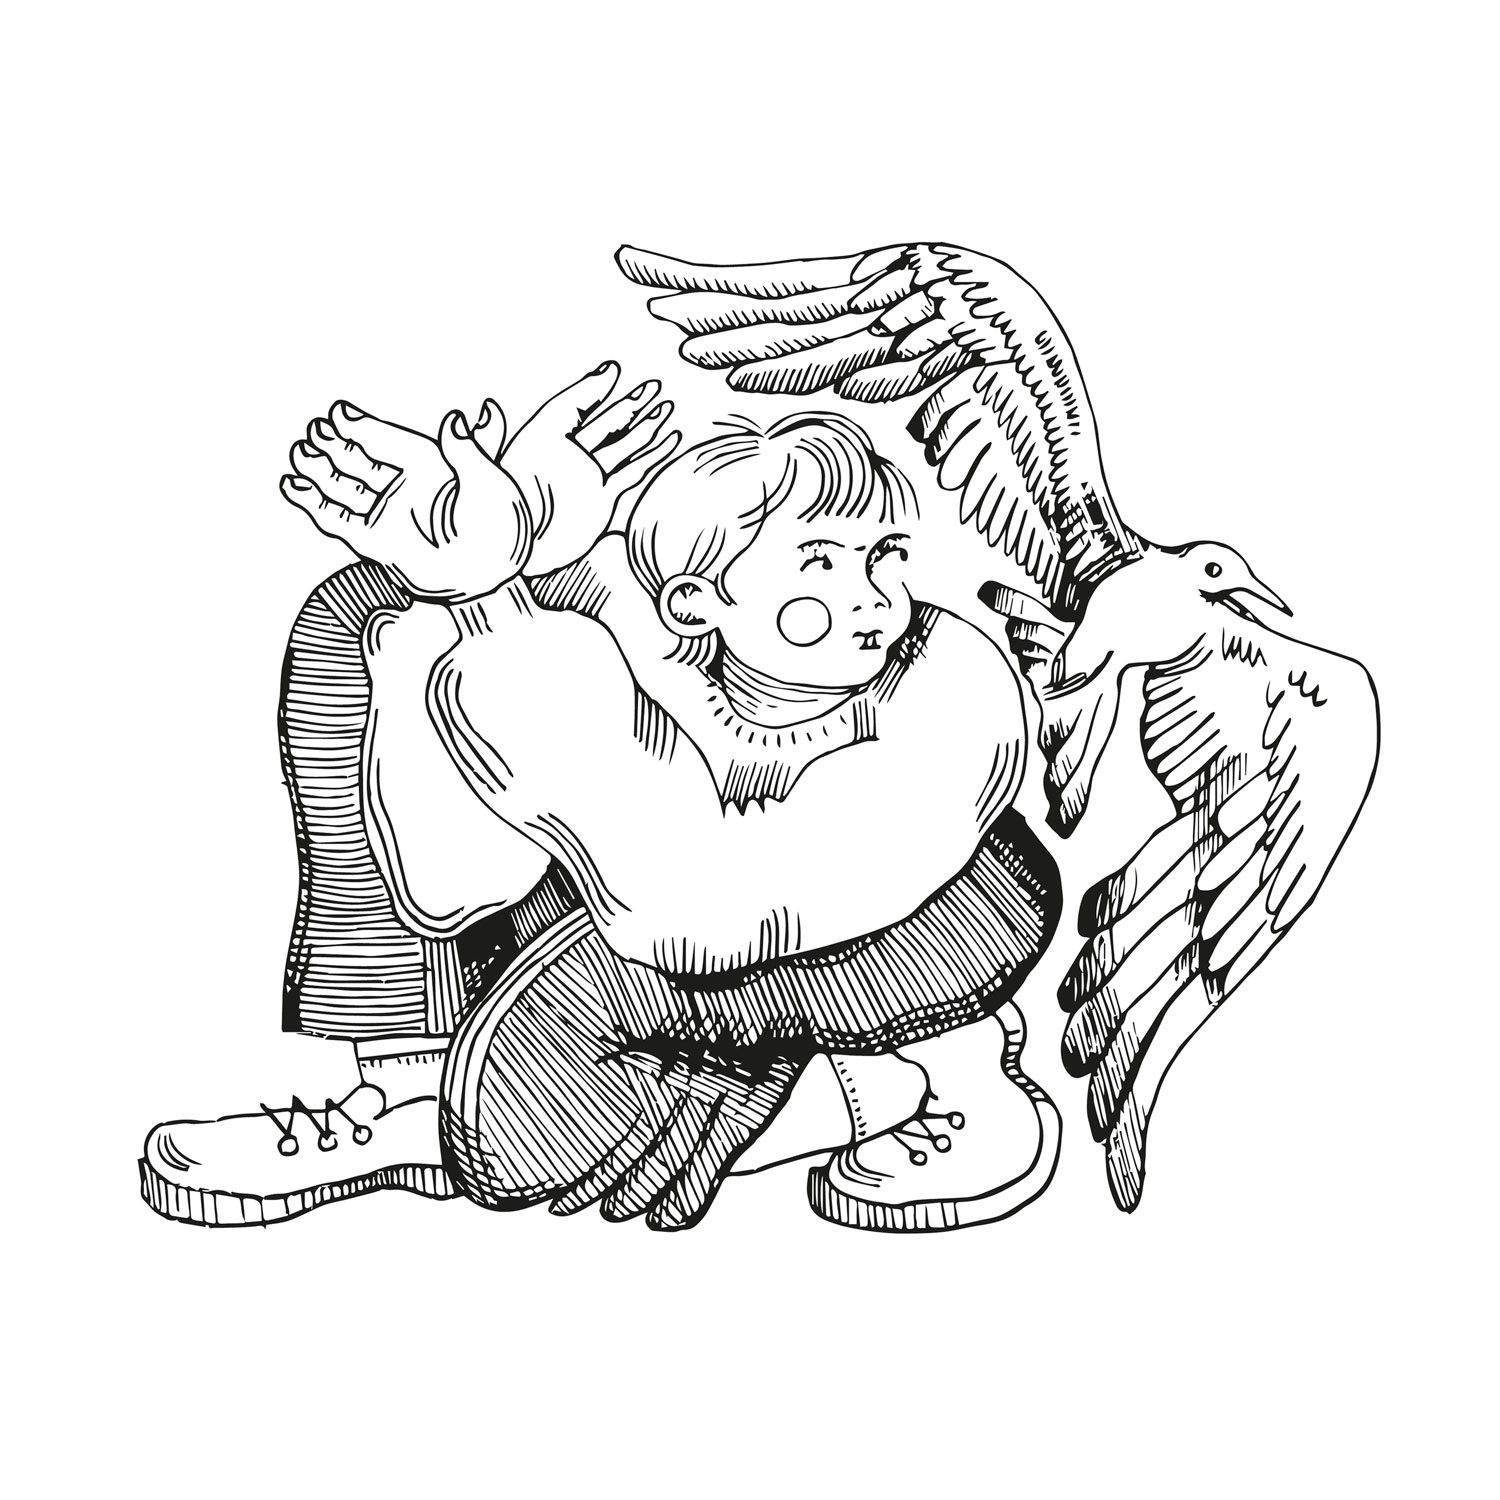 Digitally vectorized black and white illustration with the title 'Bird'. Depiction of a child playing with his hands to imitate a bird flying beside him.